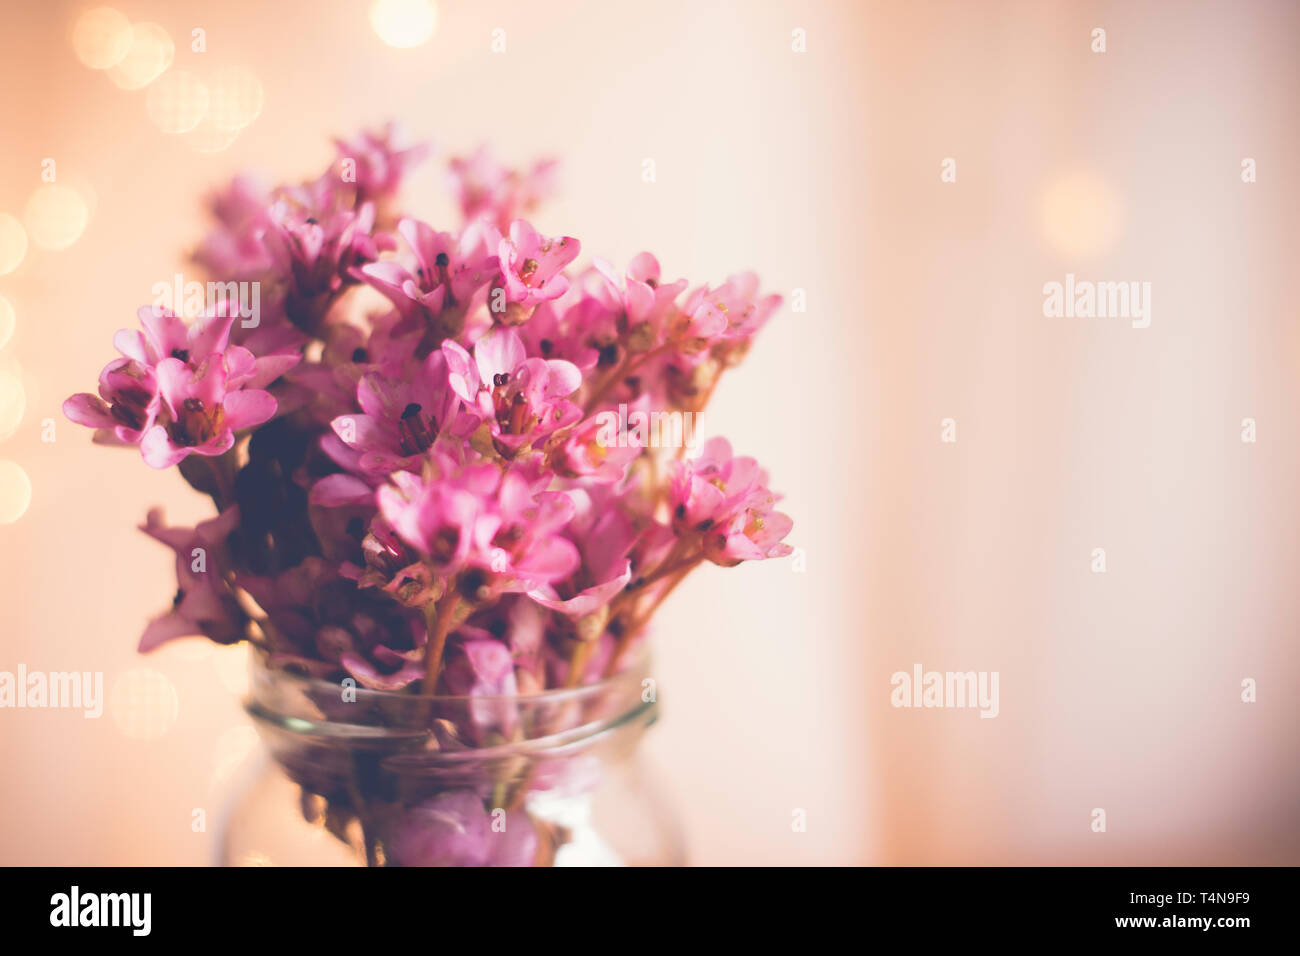 Pink Bergenia flowers in a clear glass vase on a wooden surface with a blurred bokeh background - flowers floral pink feminine Stock Photo